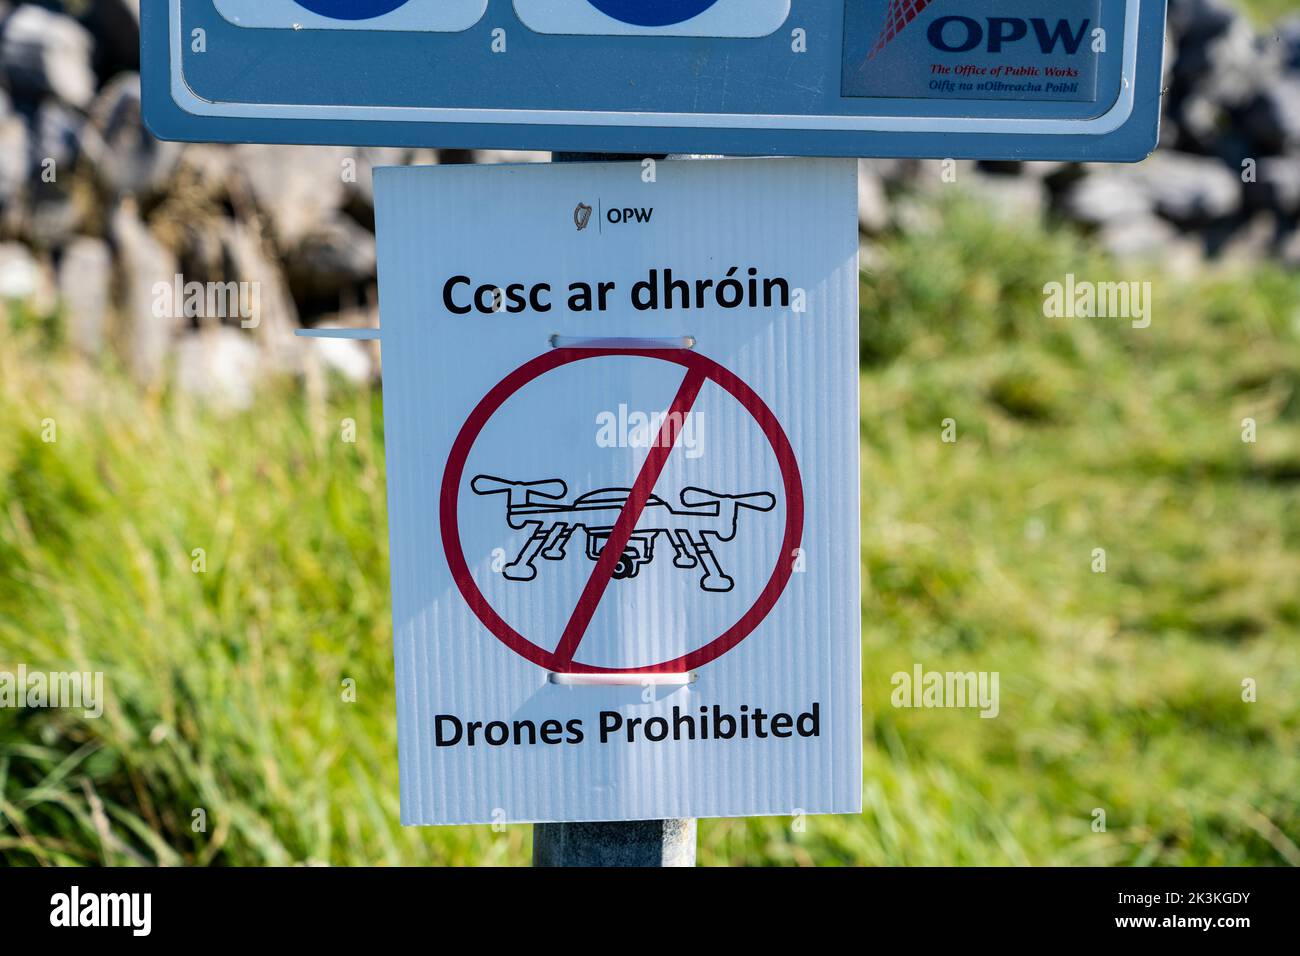 Sign from the Office of Public Works - drones prohibited. The ancient fortress of Dún Aonghasa or  Dún Aengus, Inishmore, the largest of the Aran Isla Stock Photo